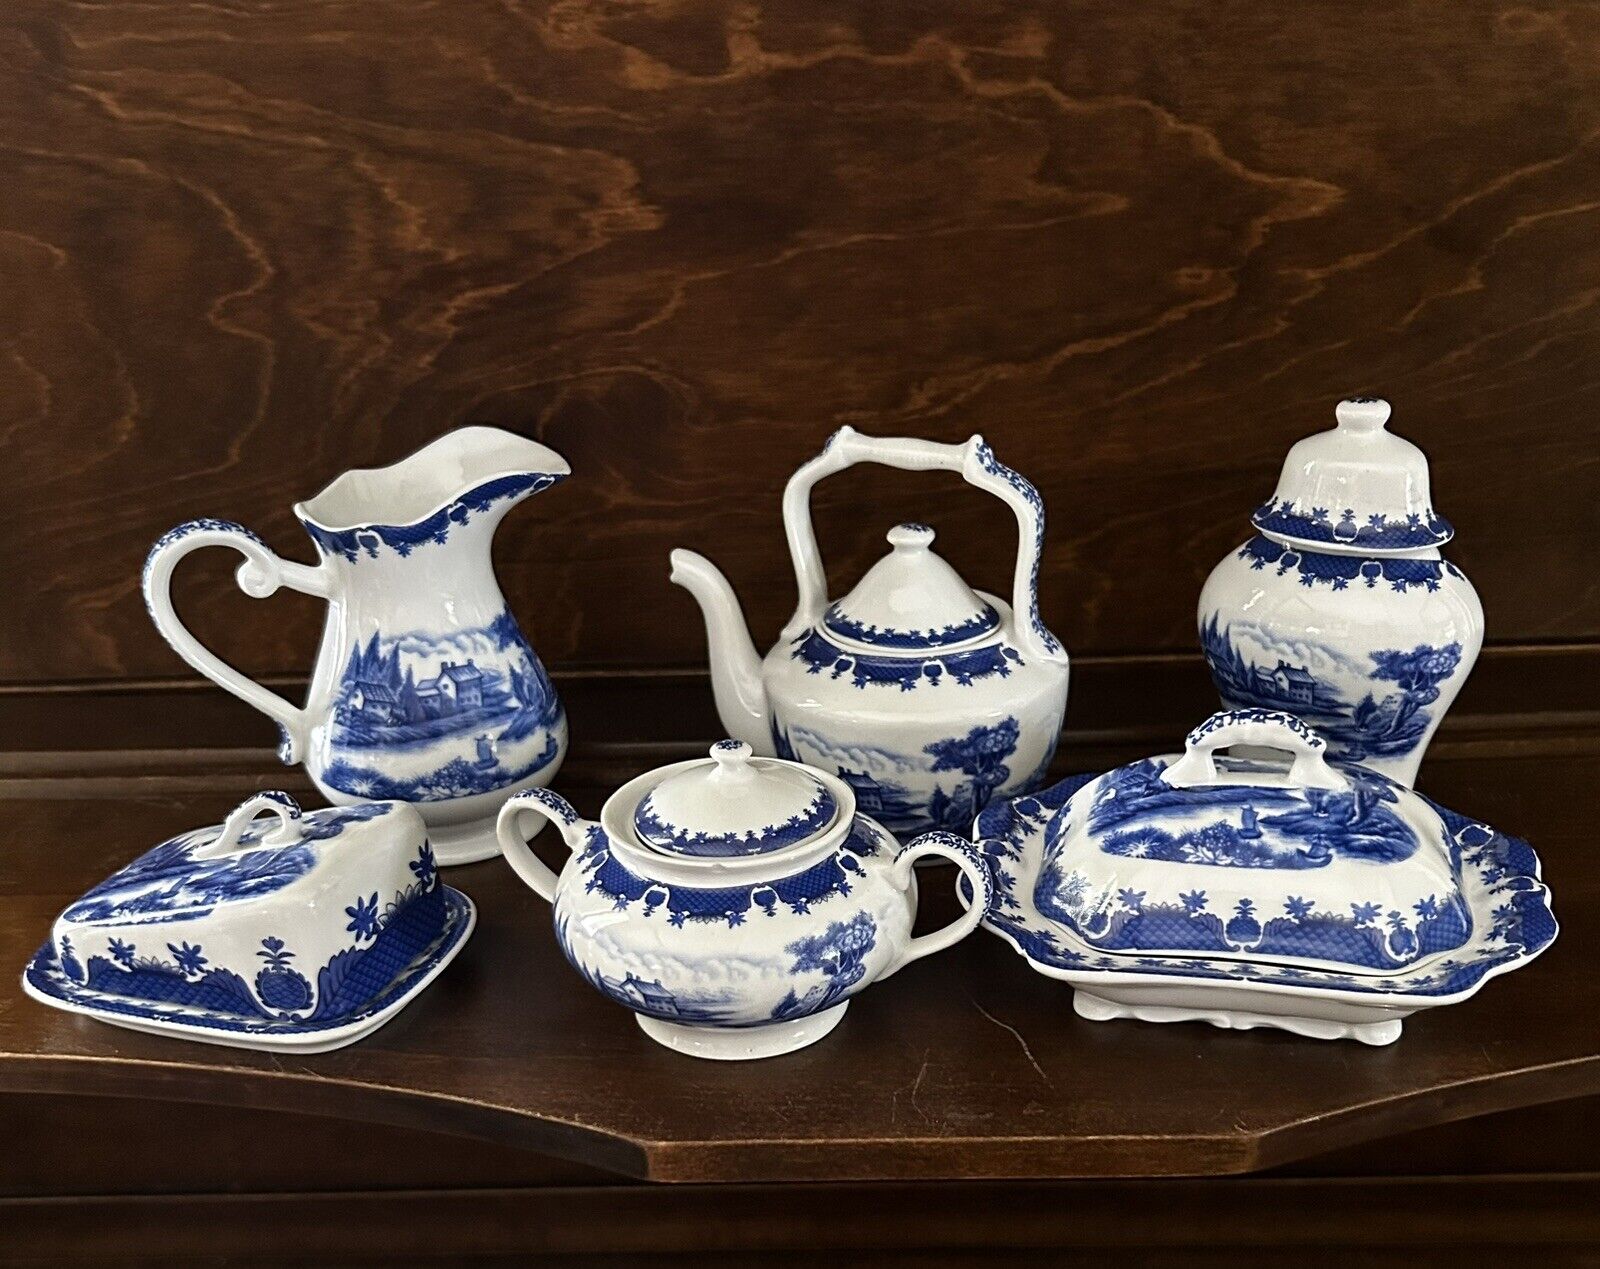 LOT OF 6 ITEMS FORMALITIES by BAUM BROS. BLUE SCENIC COLLECTION Miniature